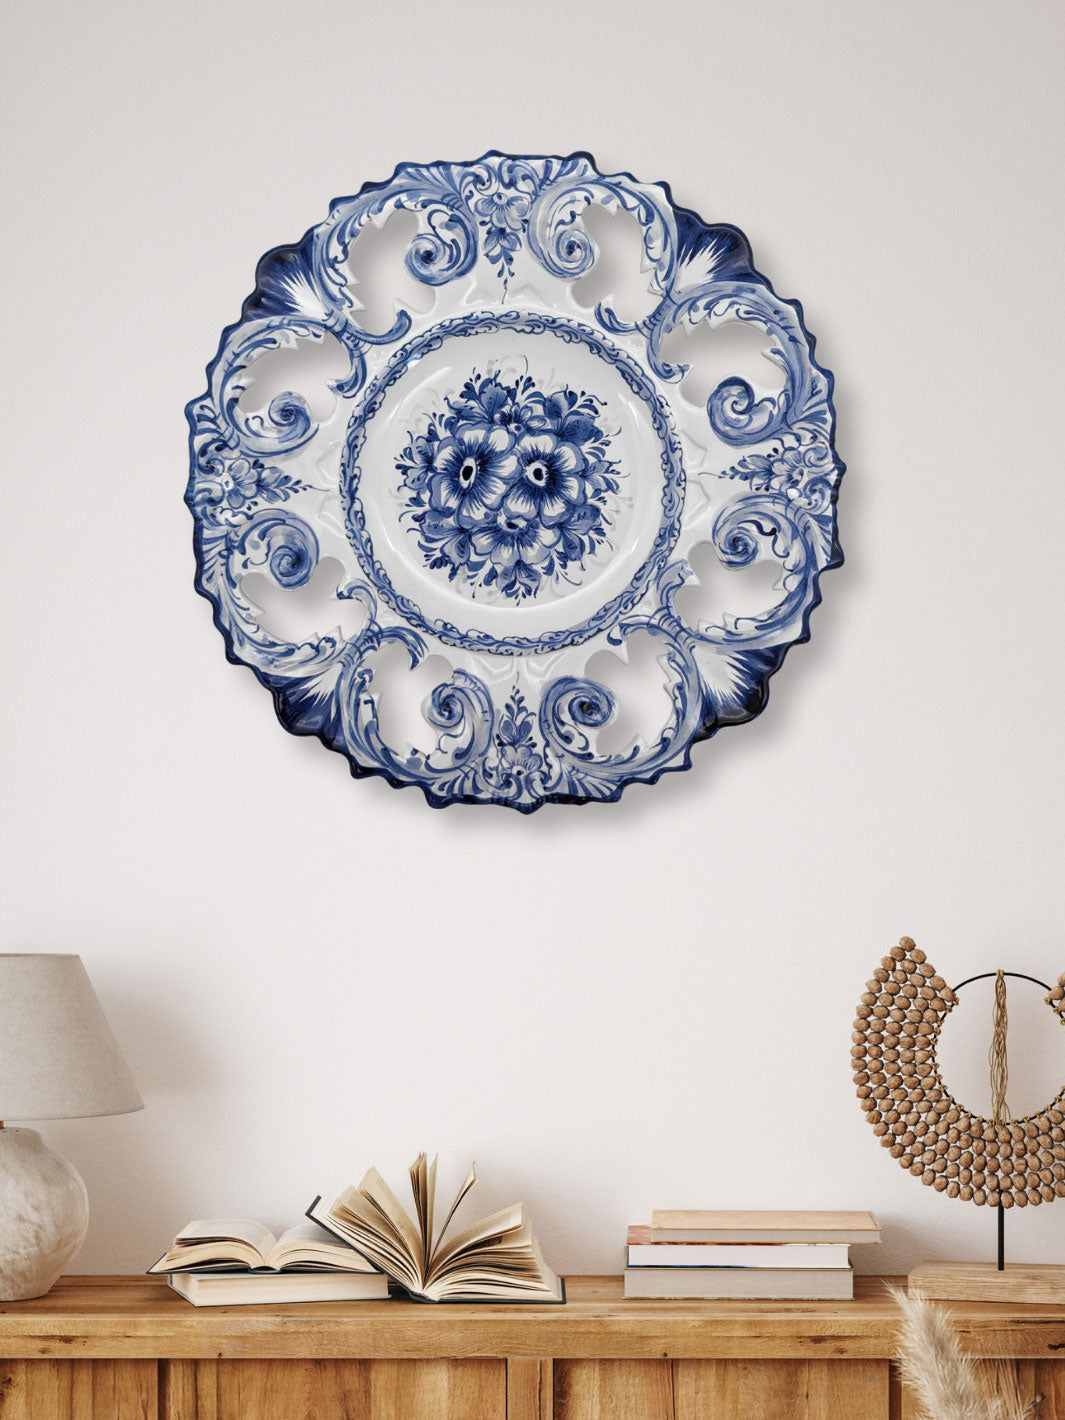 14 Inch Hand painted Blue and White Portuguese Ceramic Decorative Plate